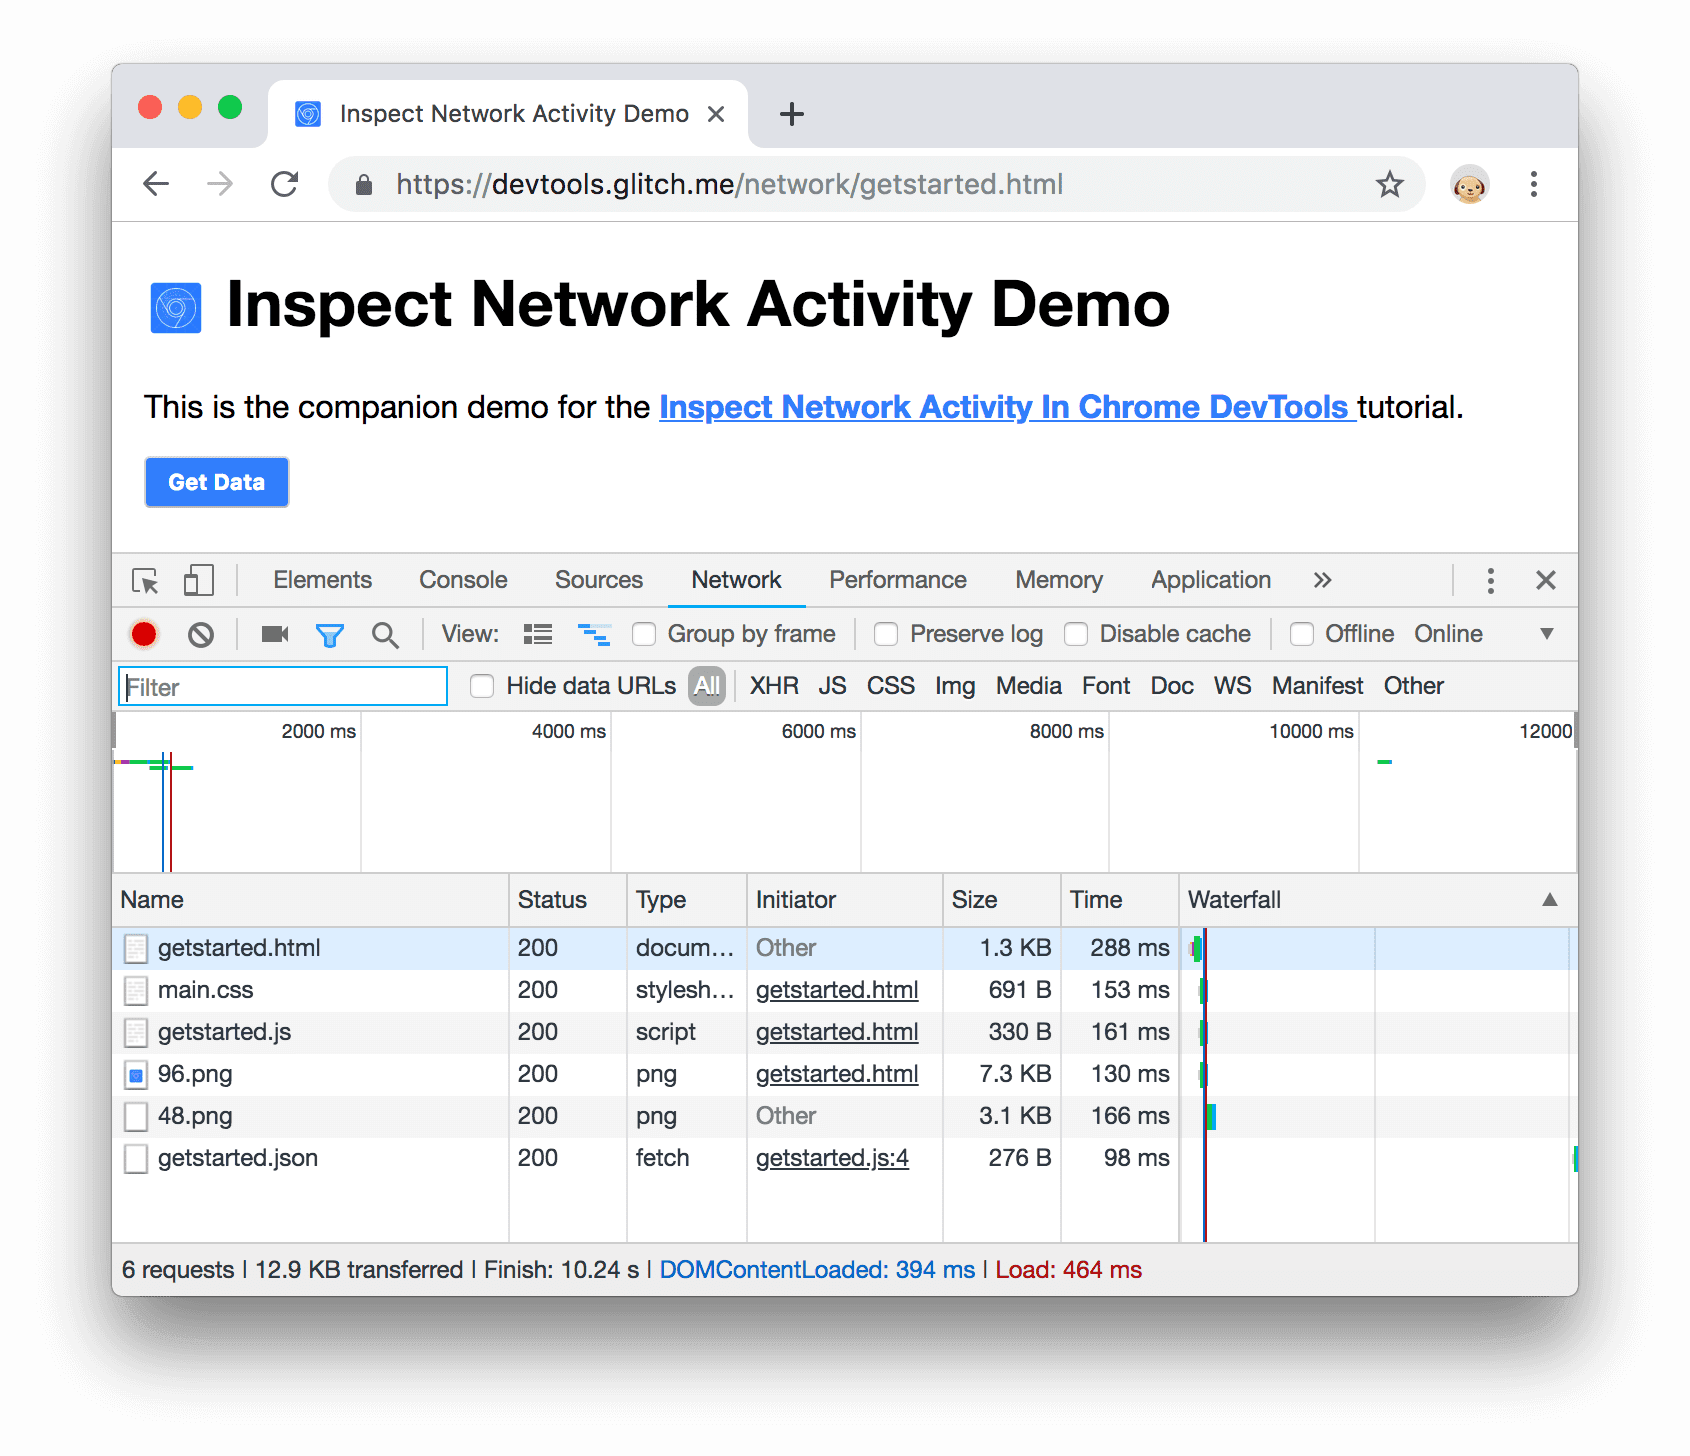 A new resource in the Network Log